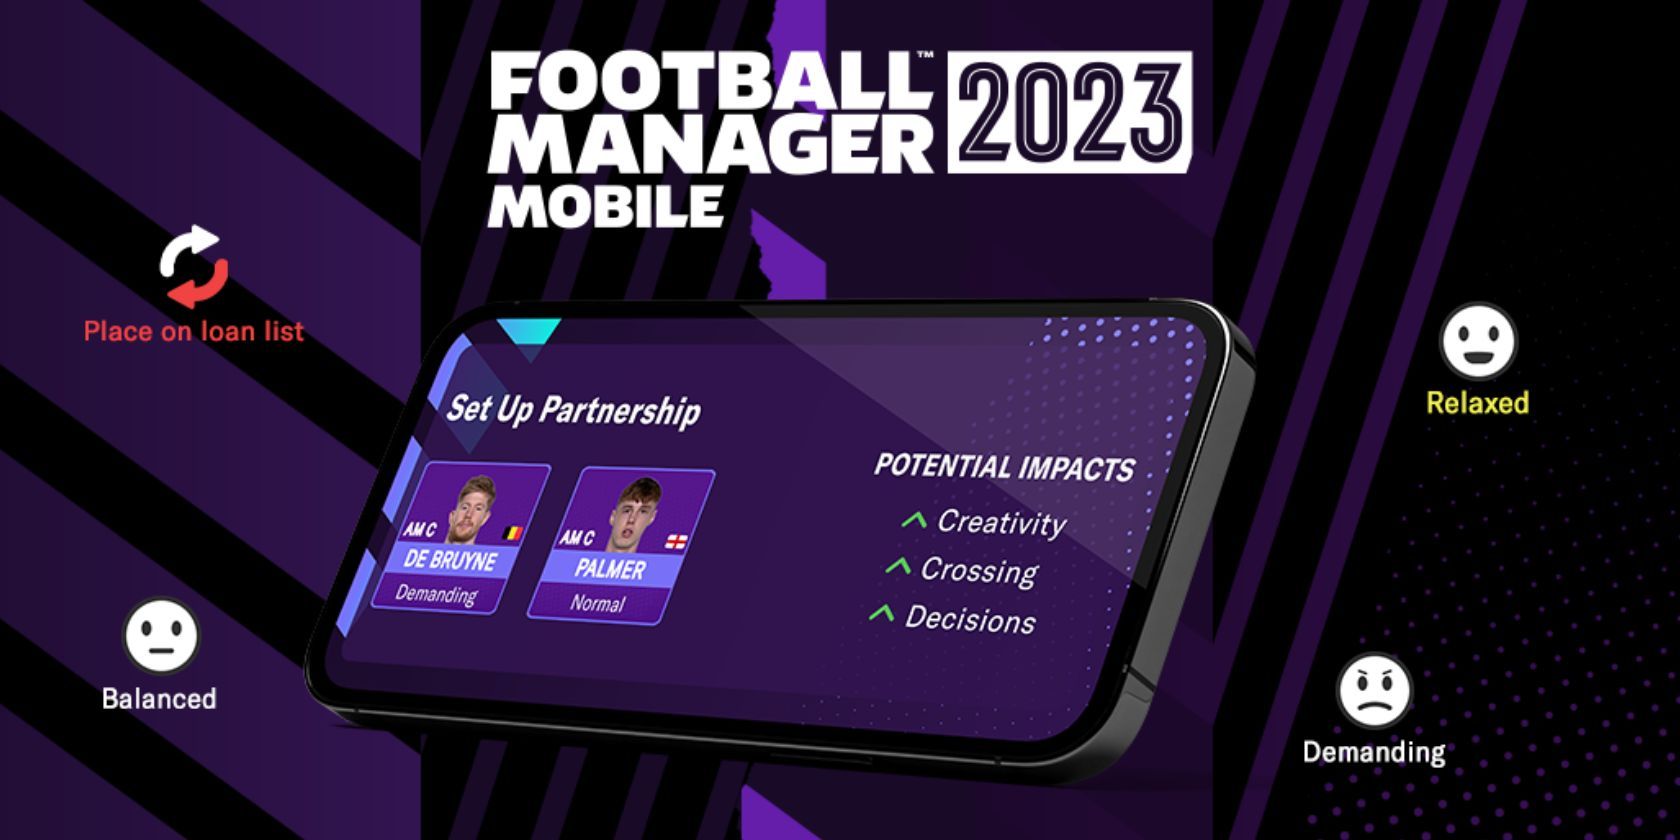 Football Manager 2023 - Download